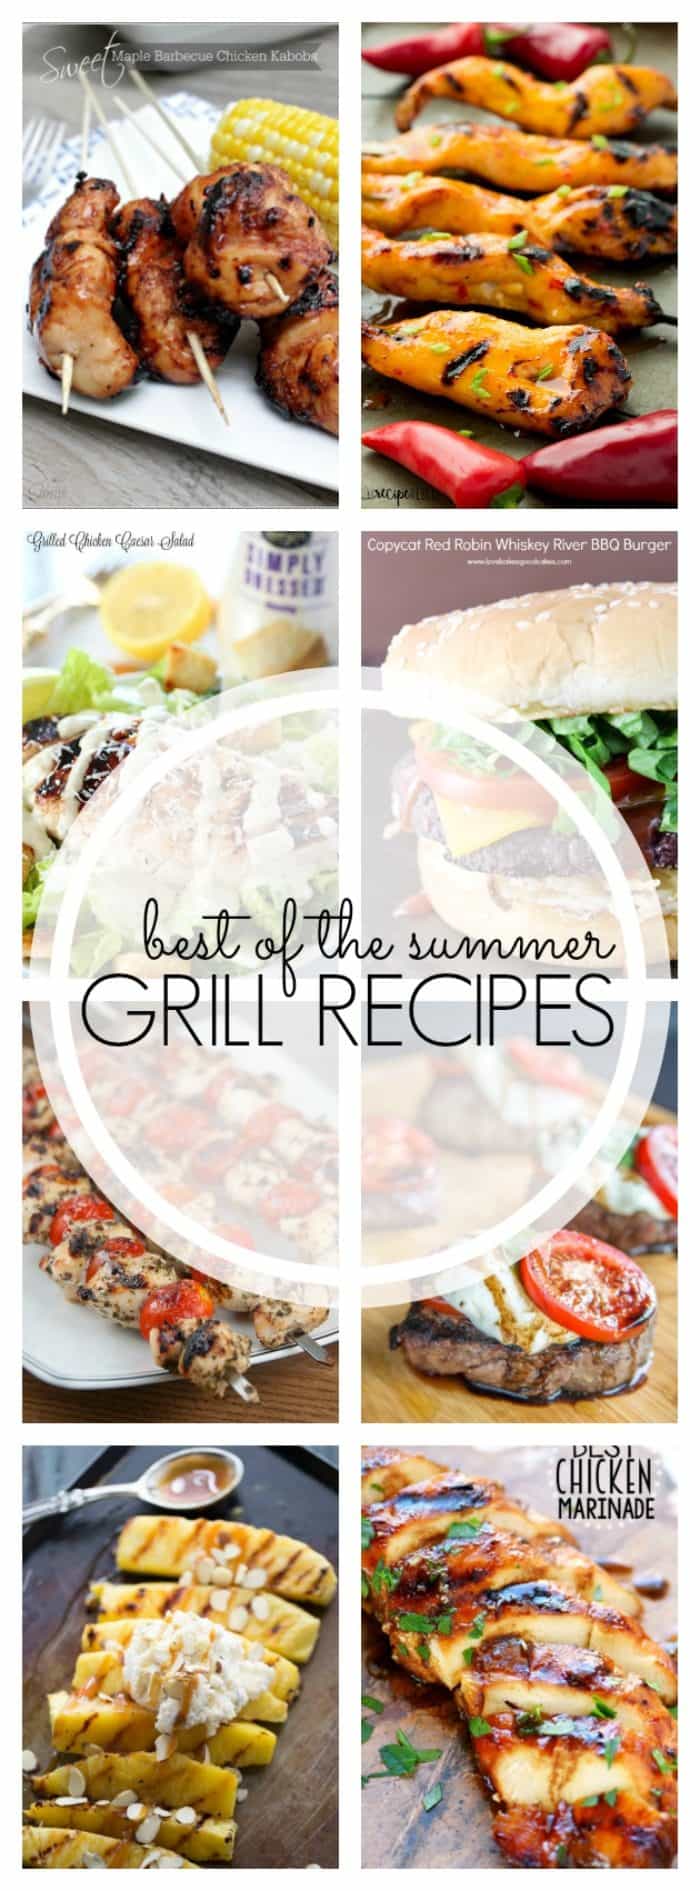 Grill recipes for summer!  These recipes feature fresh flavors that only summer can bring!